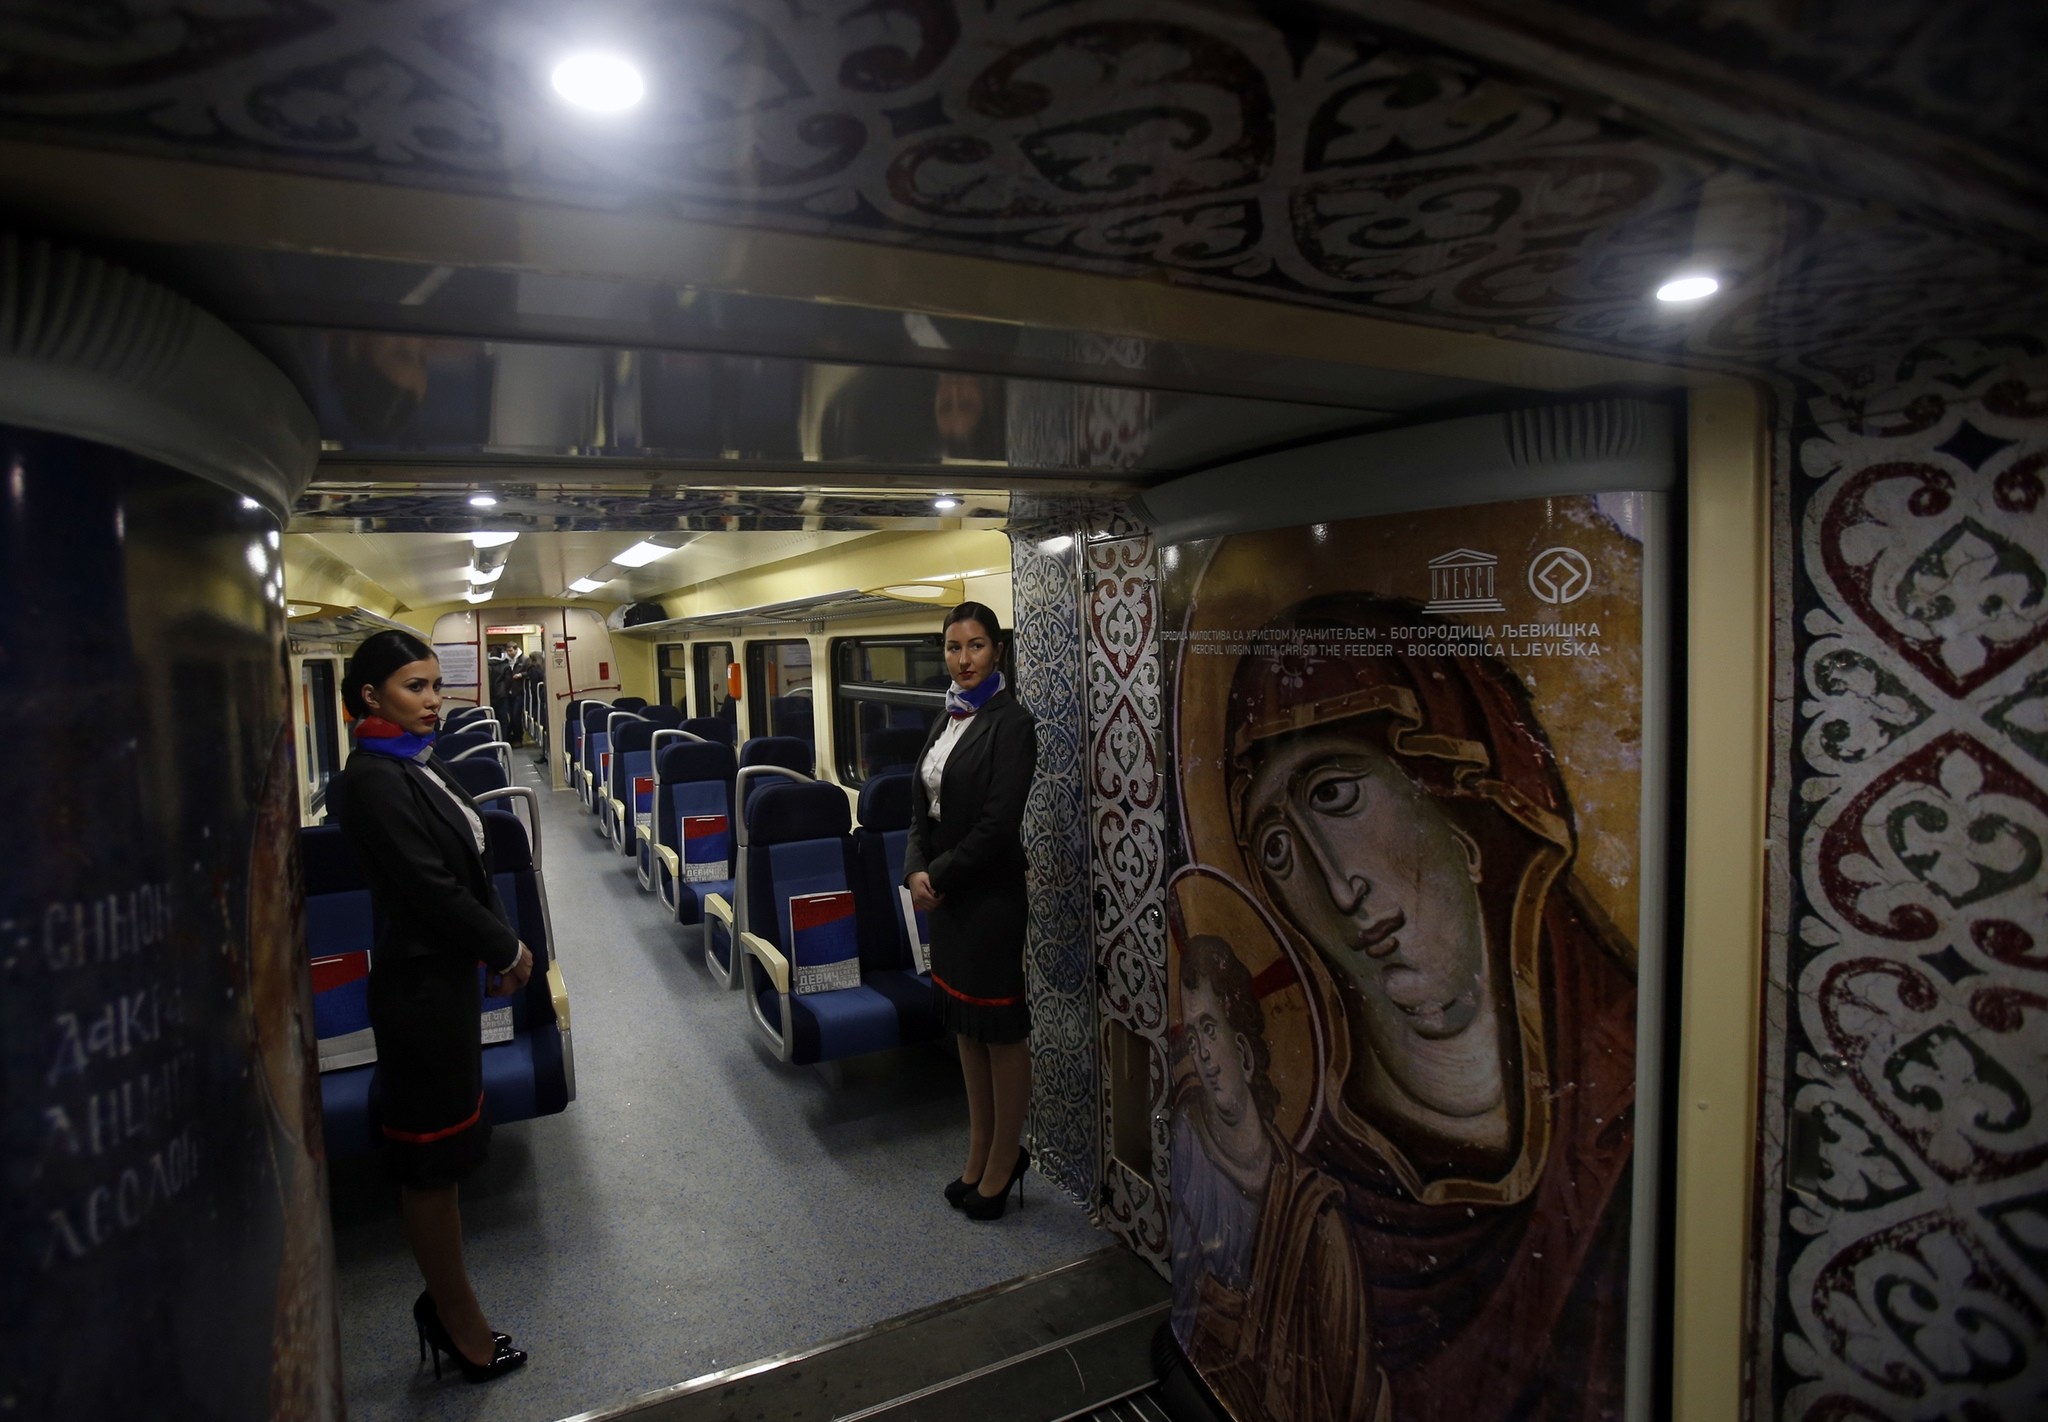 Train hostesses stand in a train carriage decorated with iconic religious figures as it departs from Belgrade to Mitrovica, Kosovo at Belgrade's railway station, Serbia, Saturday, Jan. 14, 2017. (AP Photo)